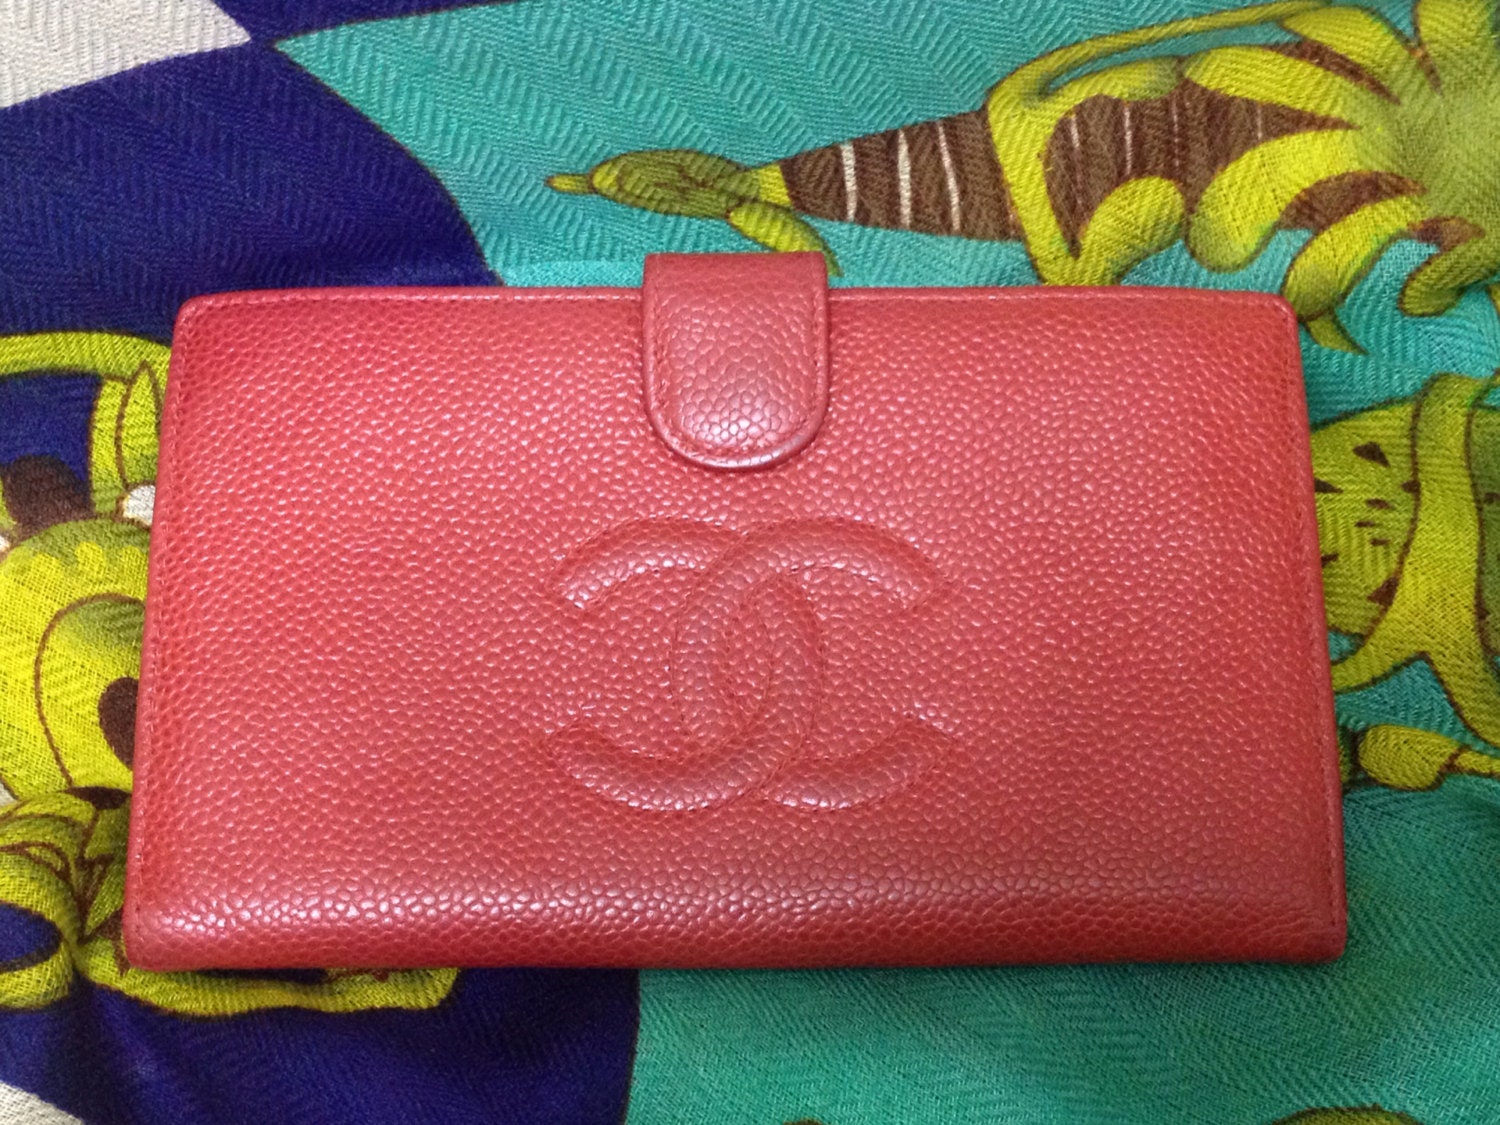 Vintage CHANEL red caviar skin wallet with large CC logo stitch mark ...